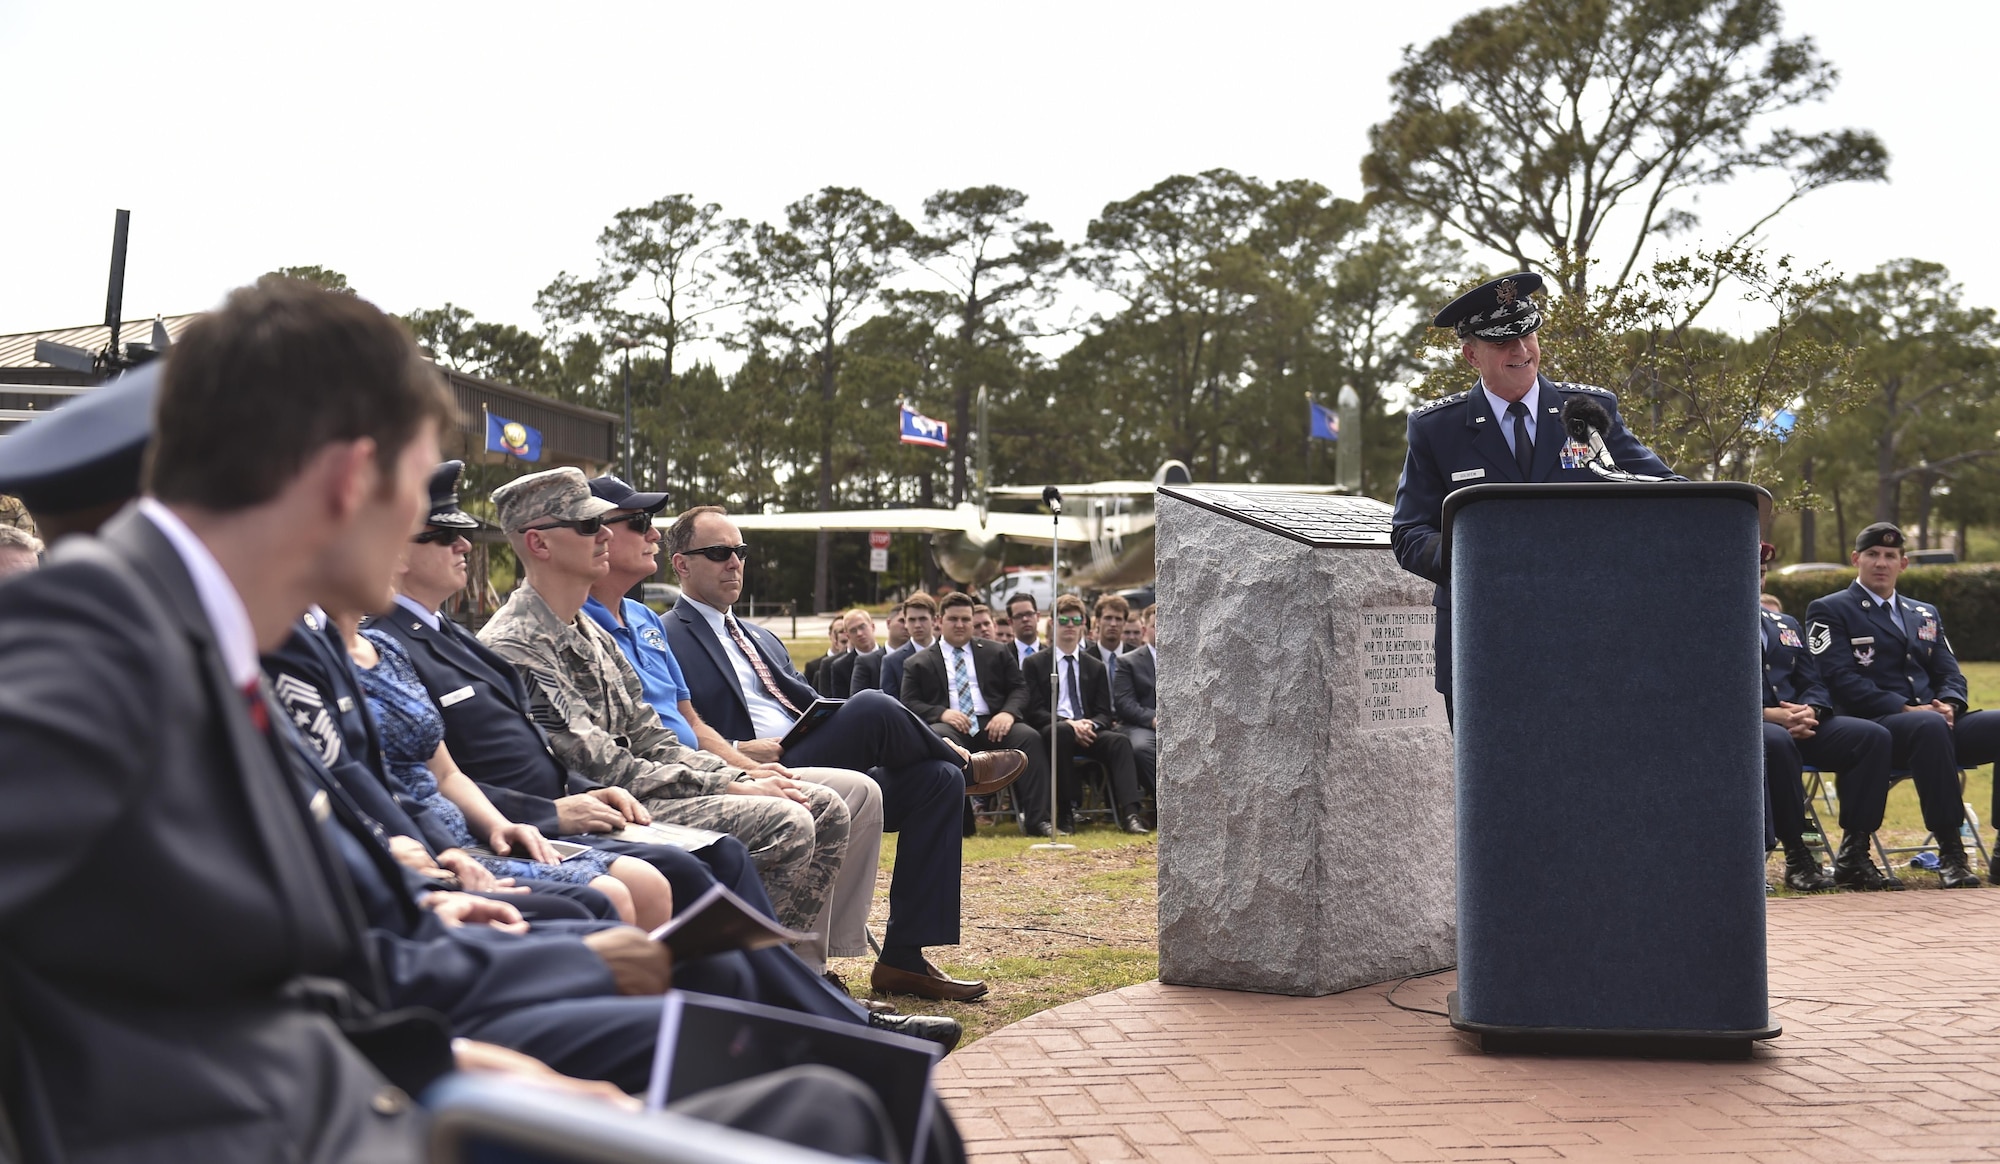 Chief of Staff of the Air Force Gen. David L. Goldfein, speaks during a dual Air Force Cross ceremony, April 20, 2017, at Hurlburt Field, Fla. Master Sgt. (Ret.) Keary Miller, a retired Special Tactics pararescueman from the Air National Guard’s 123rd Special Tactics Squadron, and Chris Baradat, a combat controller since separated, both received Air Force Crosses for their actions in combat, which were upgraded from Silver Star medals after a service-wide review. (U.S. Air Force photo by Senior Airman Ryan Conroy) 